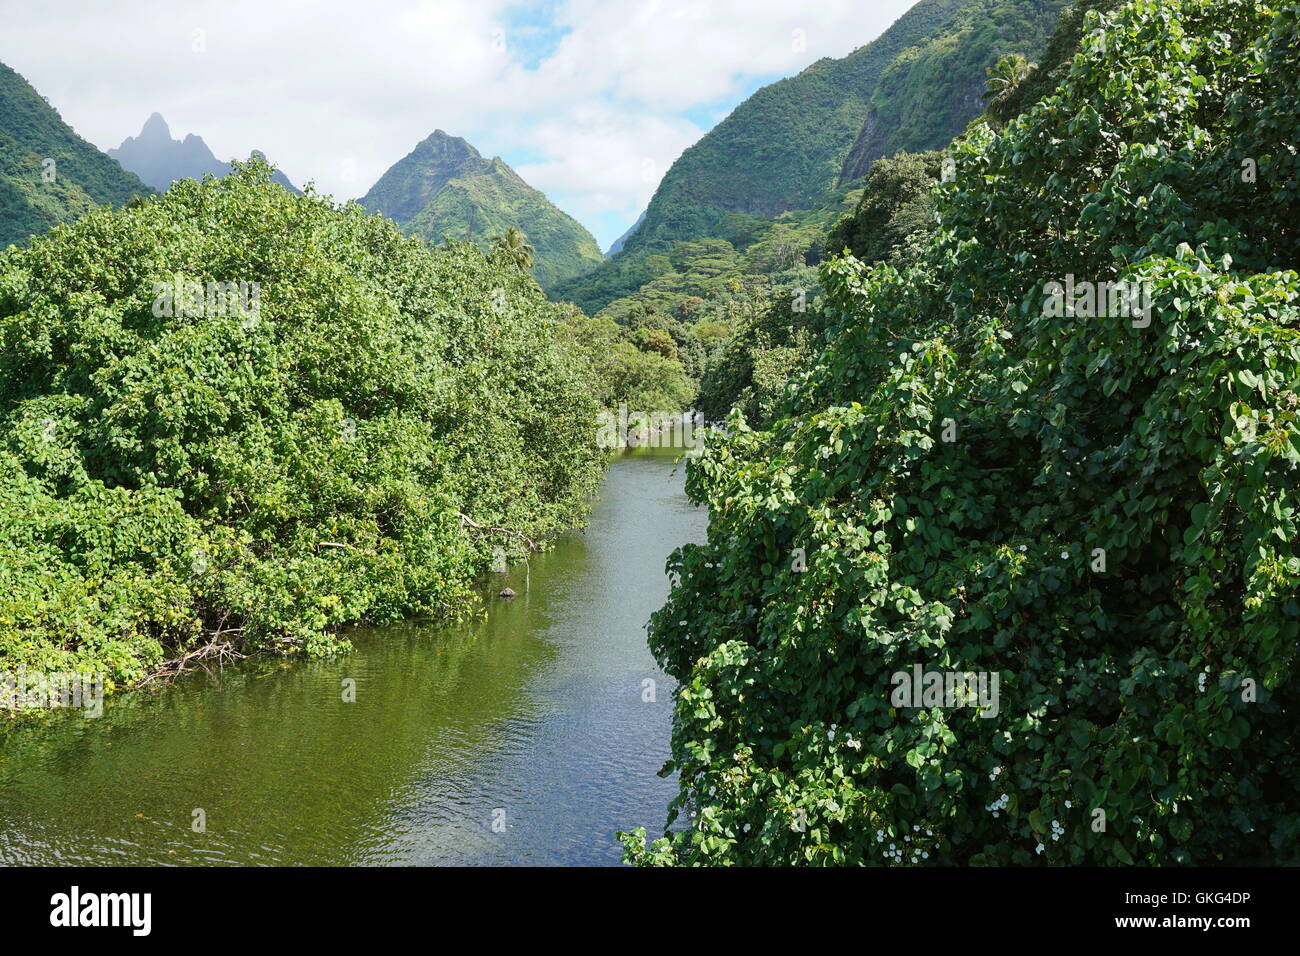 Tahiti iti landscape, the river and valley Vaitepiha with mountains in background, French Polynesia Stock Photo